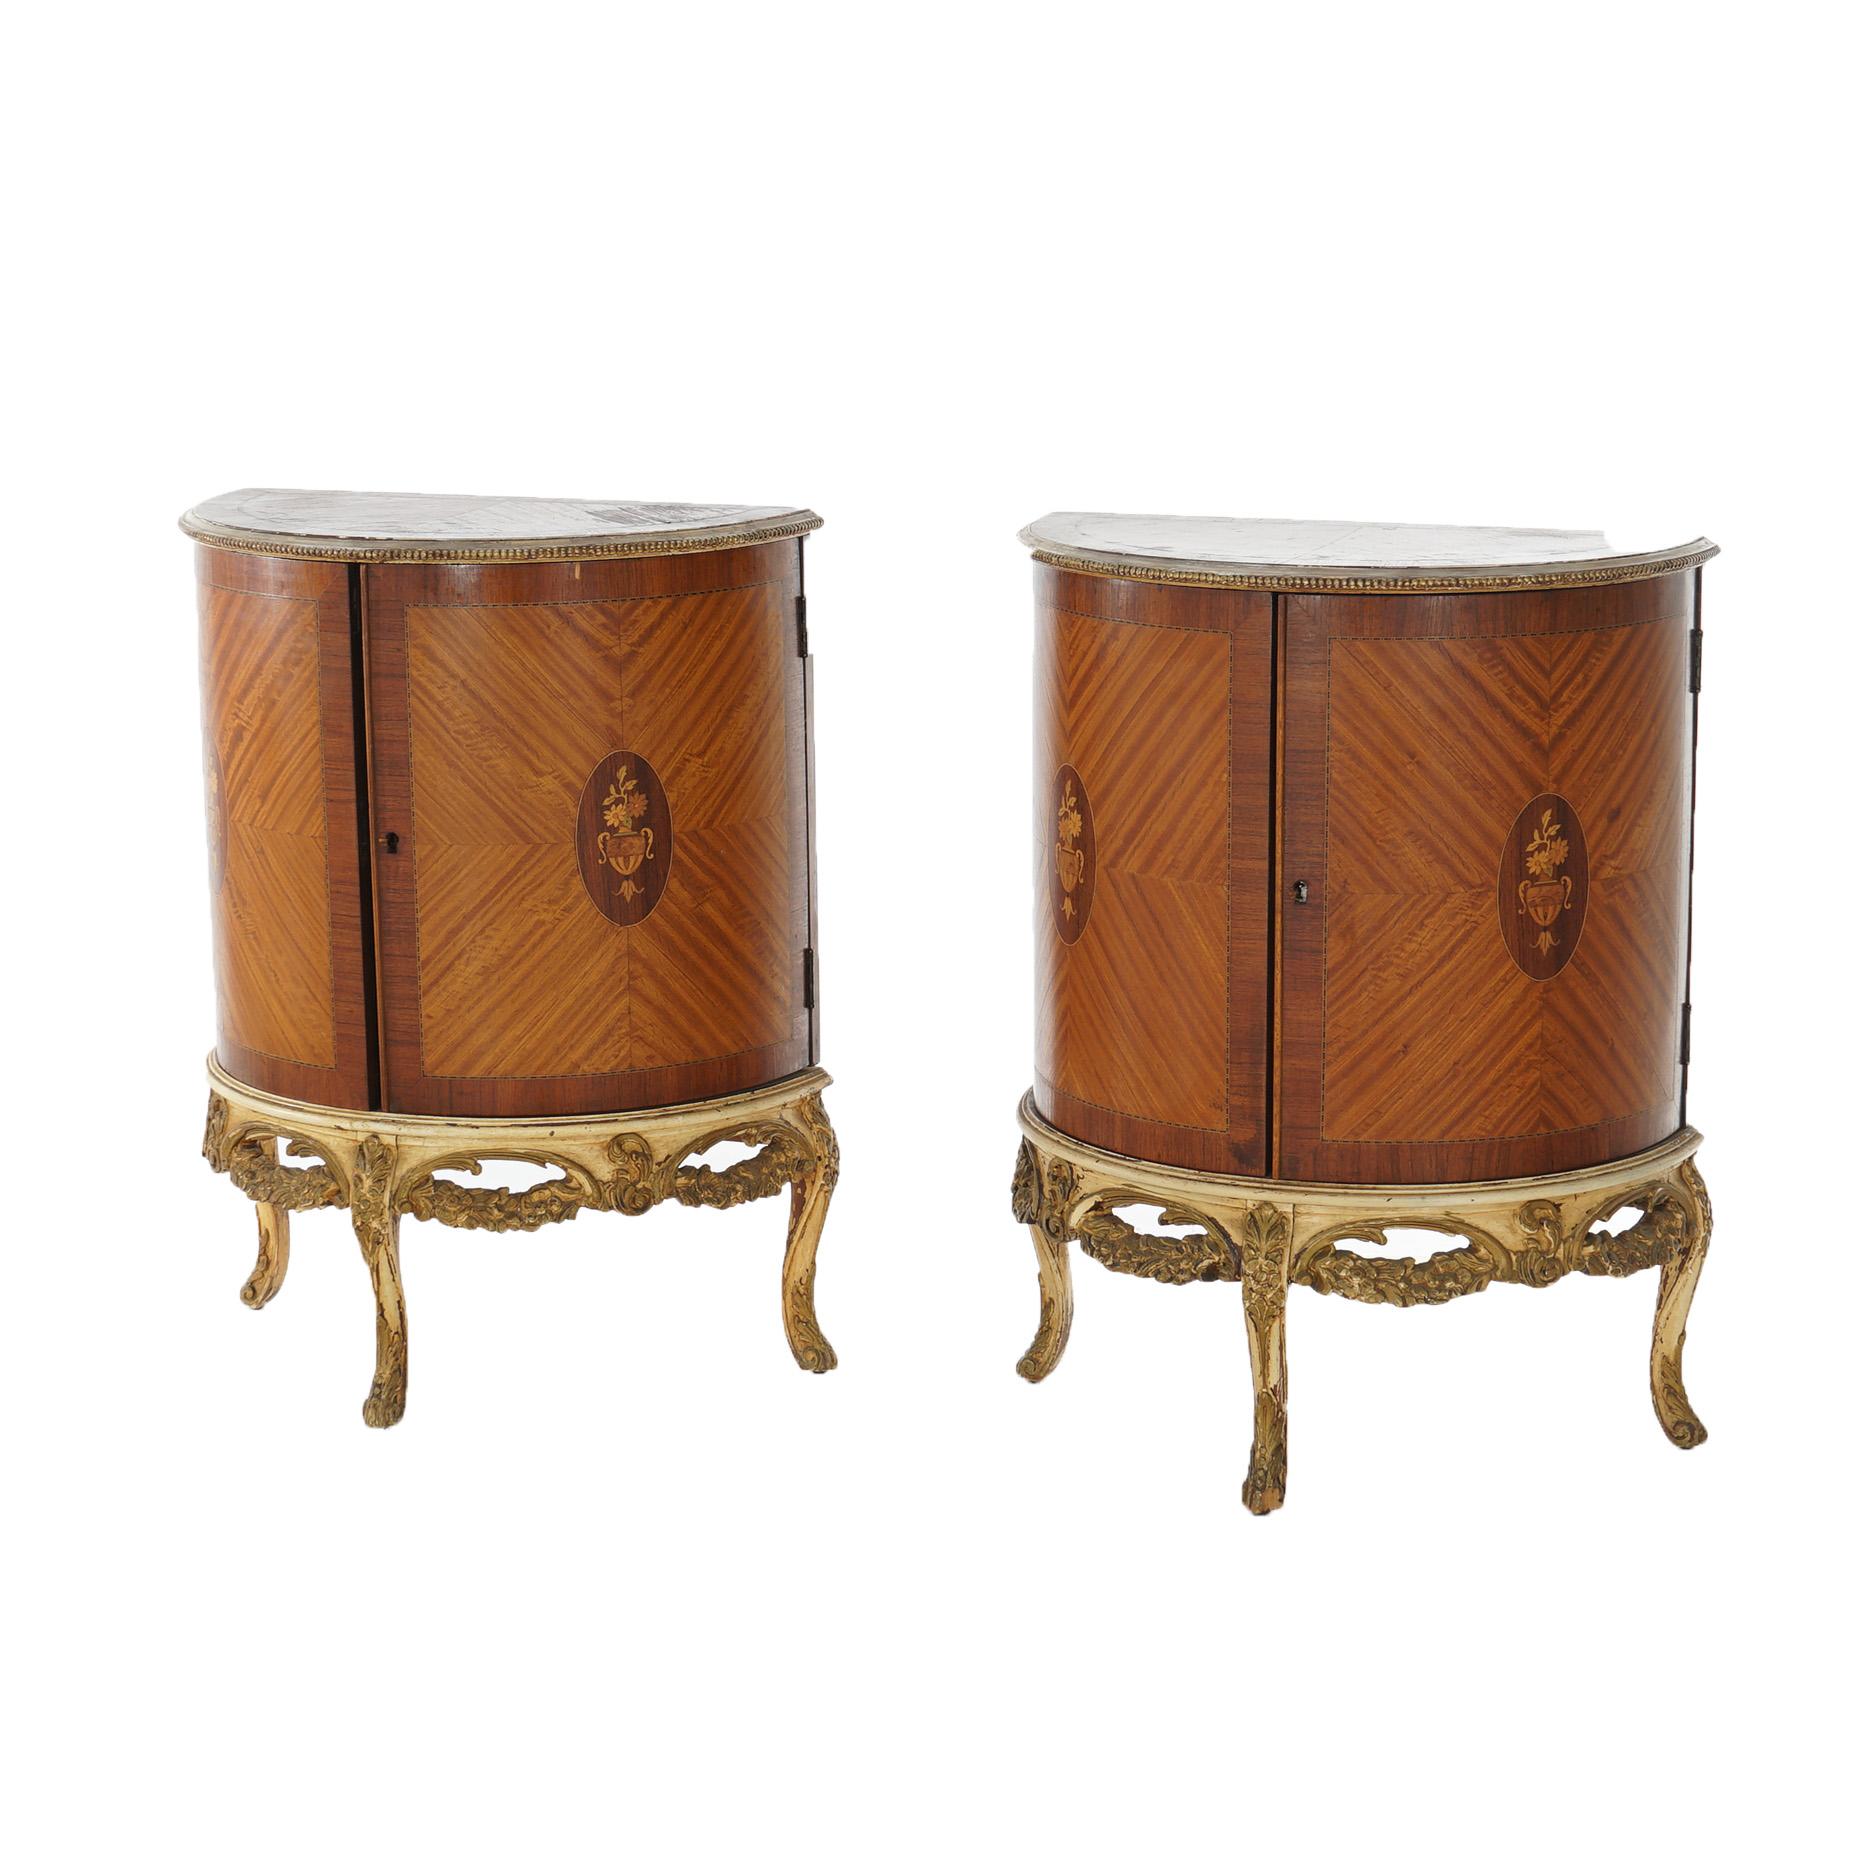 An antique pair of French side stands offers demilune form with satinwood facing and having floral marquetry medallion, double curved doors opening to shelved interiors, garland form apron and raised on cabriole legs, c1920

Measure - 29